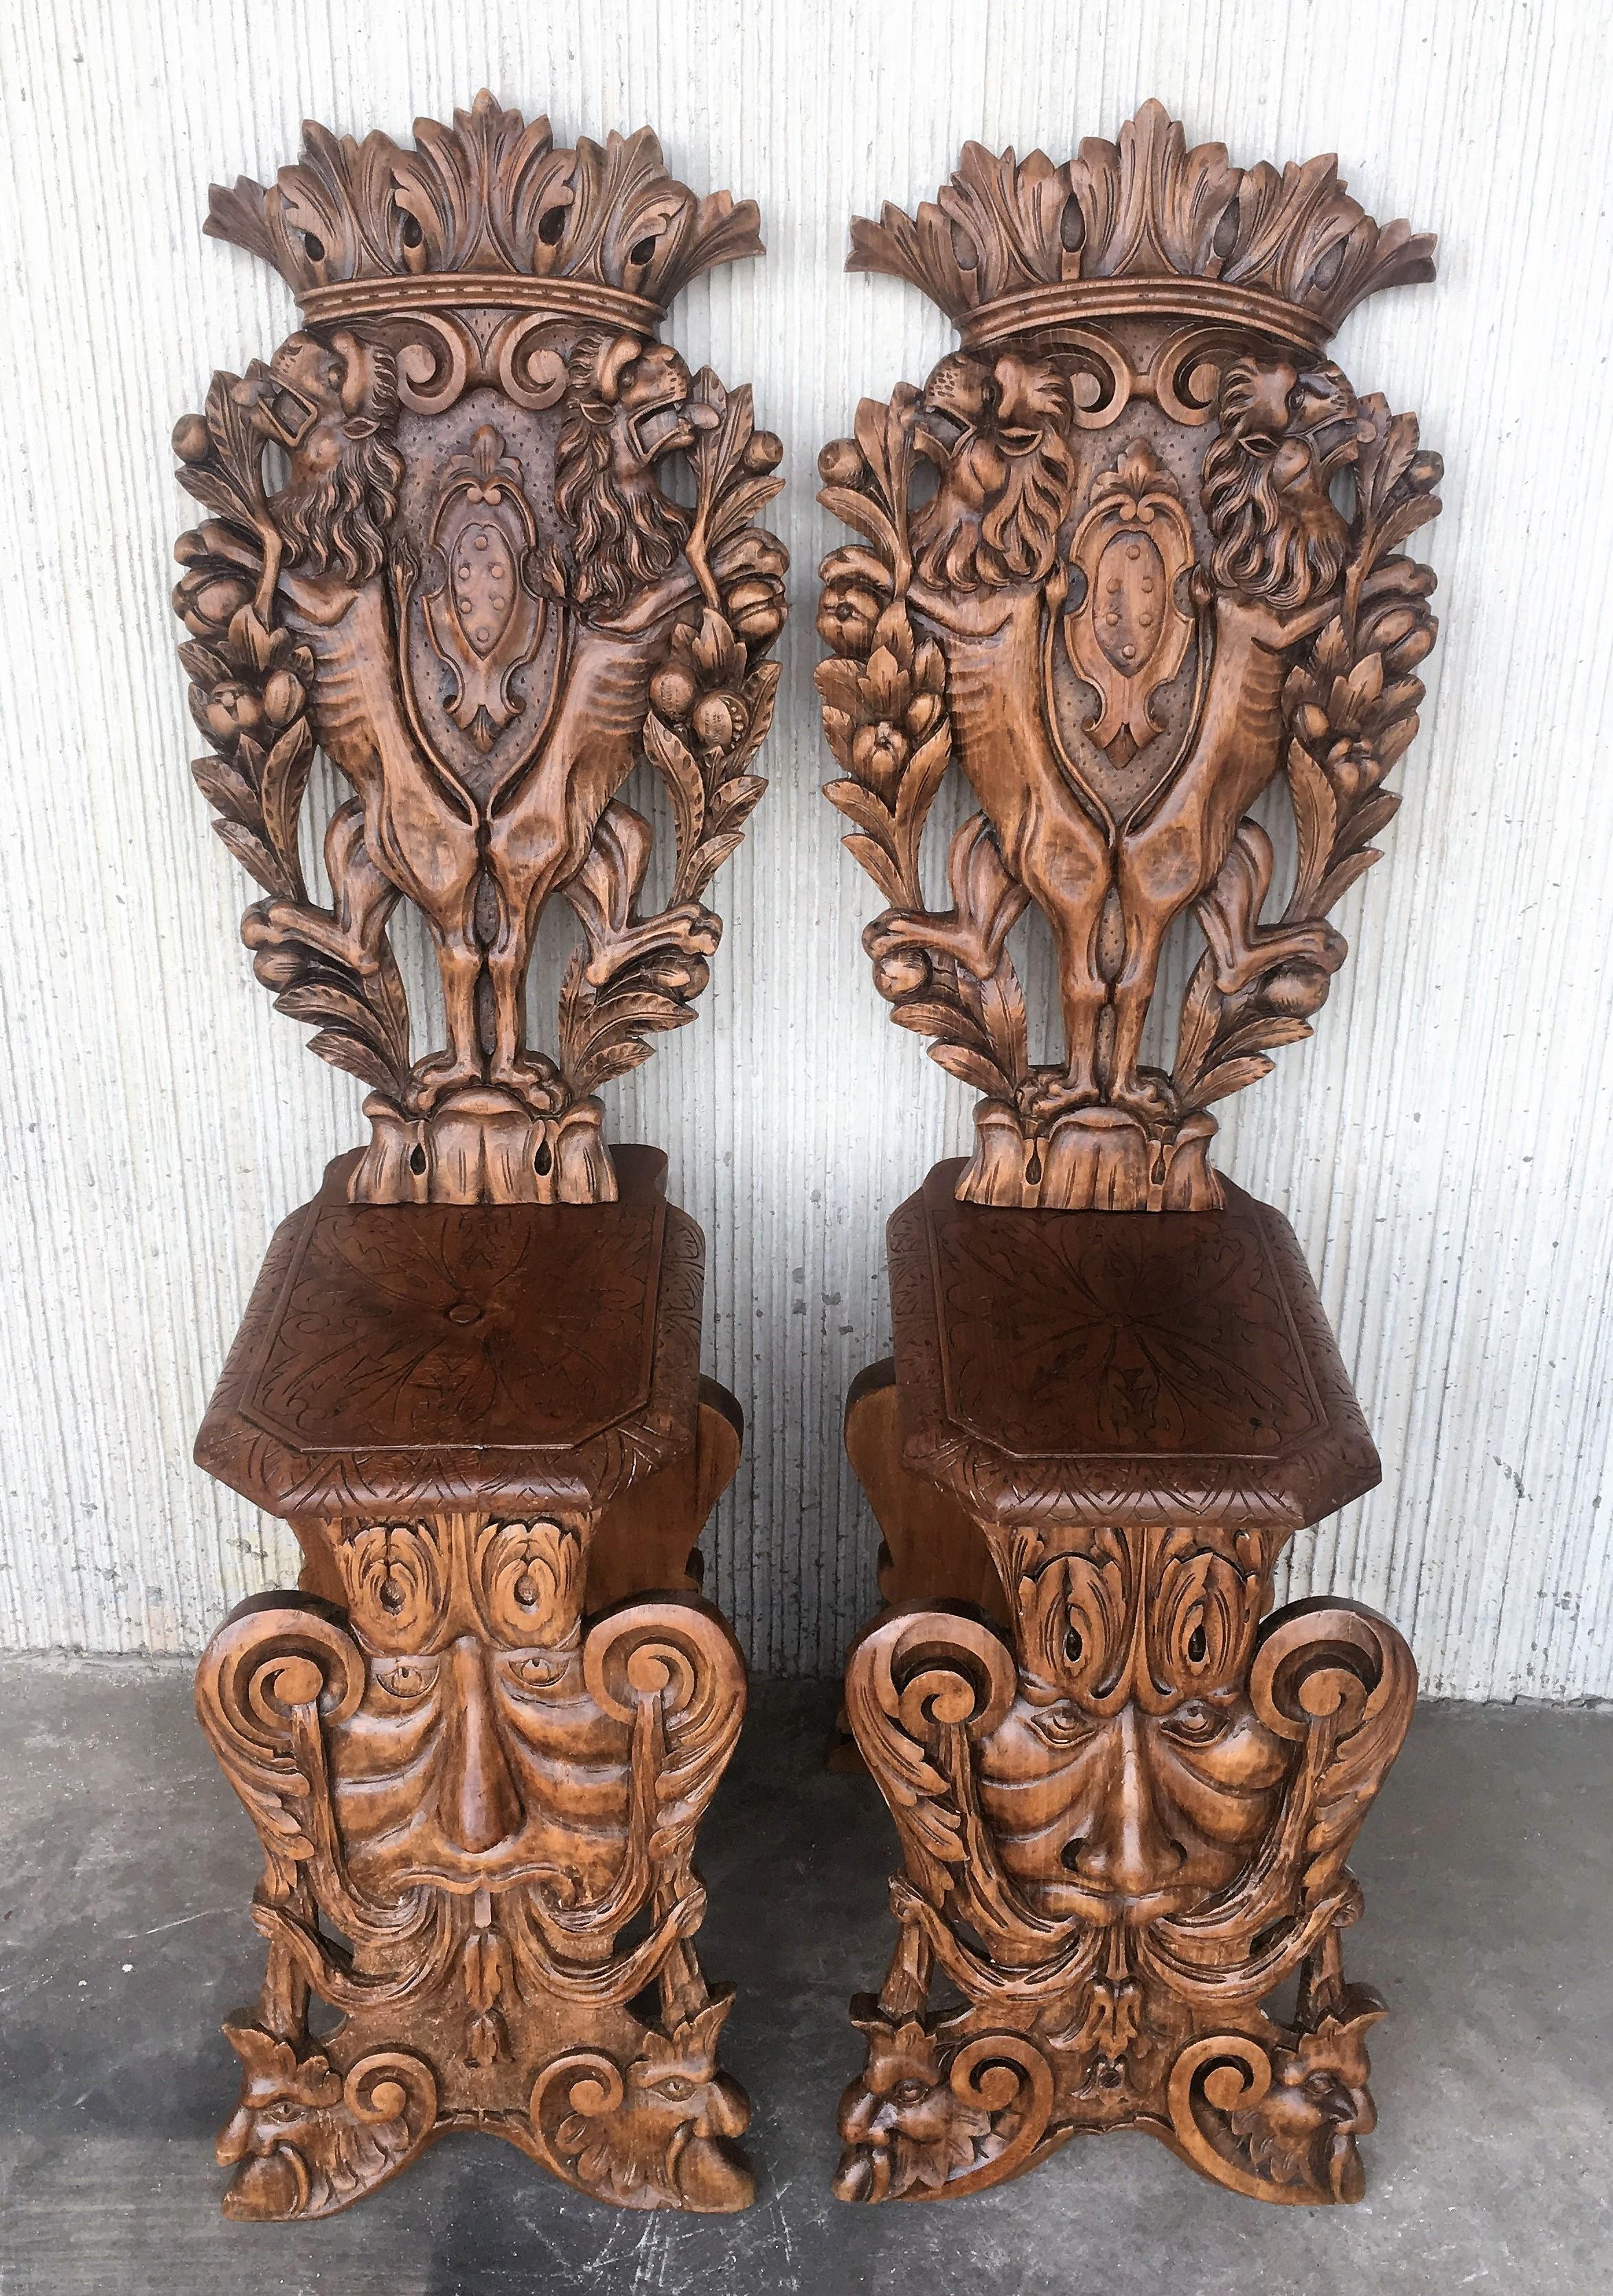 Hand-Carved Pair of 18th Century Italian Renaissance Lion Carved Walnut Sgabello Hall Chairs For Sale